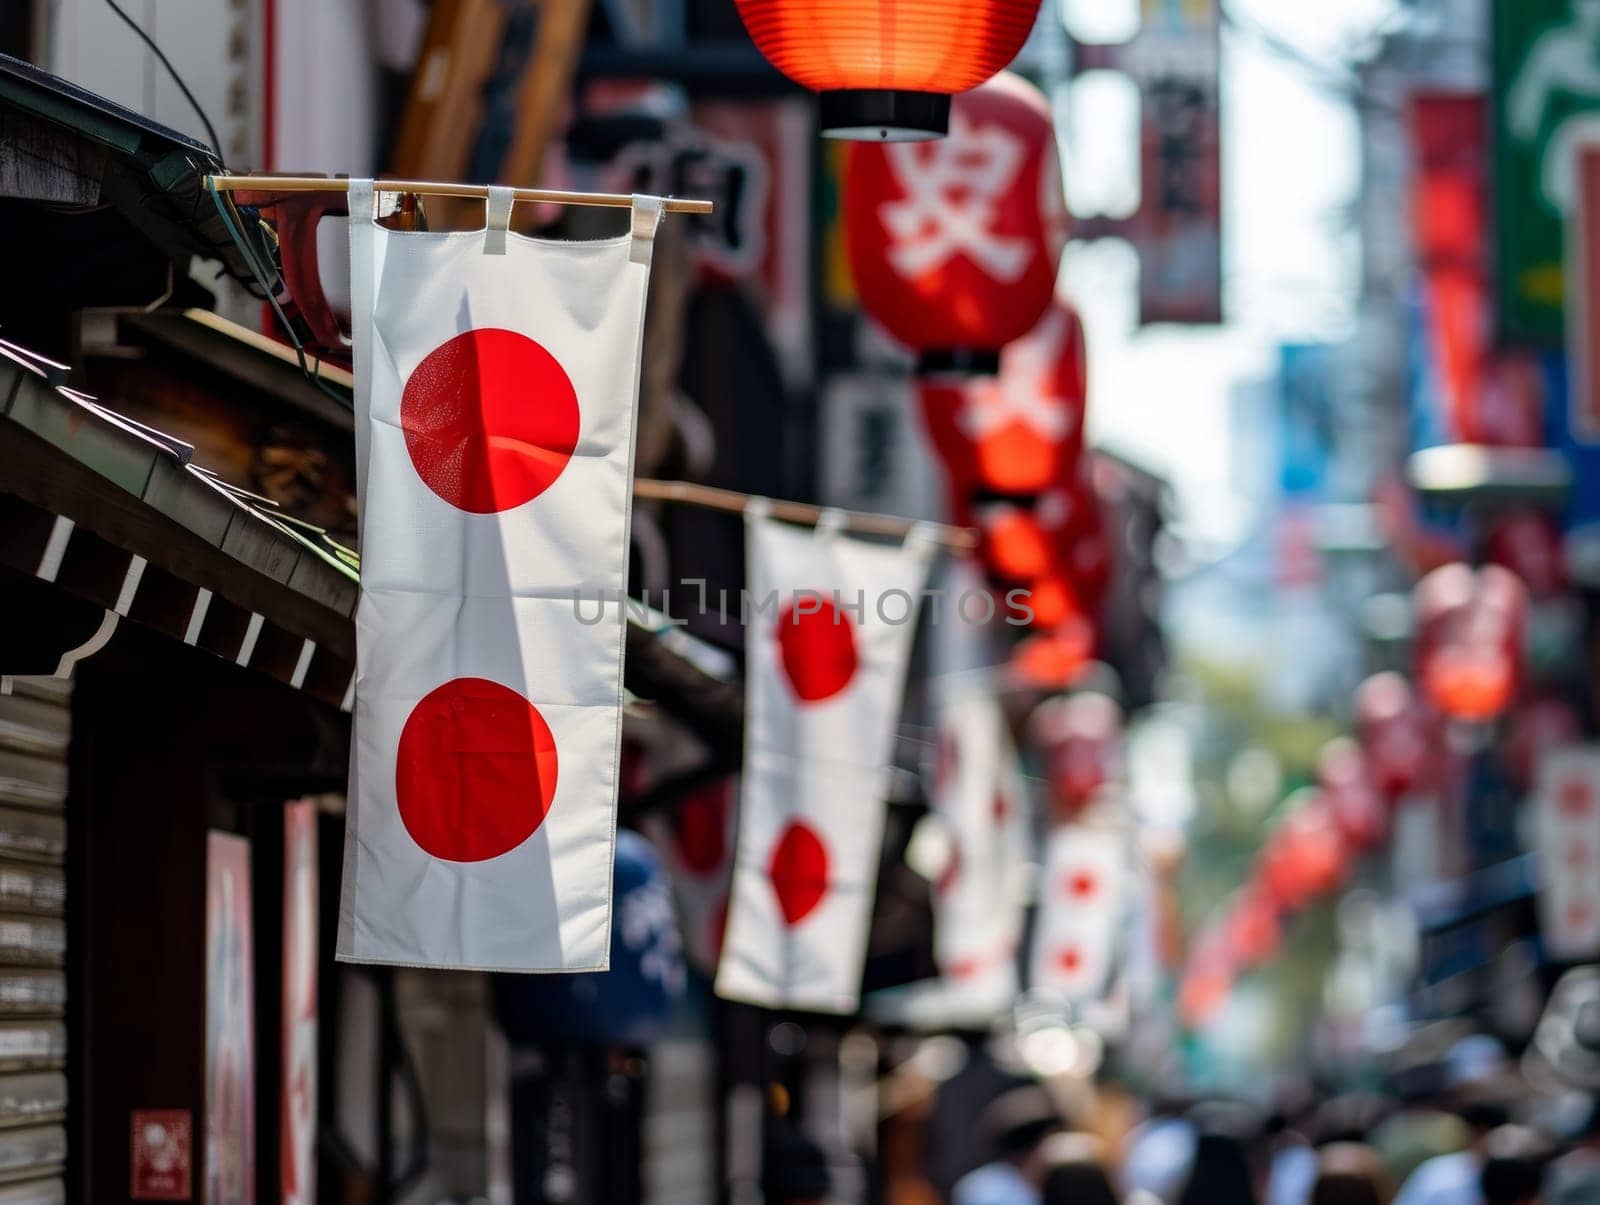 A festive atmosphere envelops the street adorned with Japanese flags, signifying cultural celebration in an urban landscape